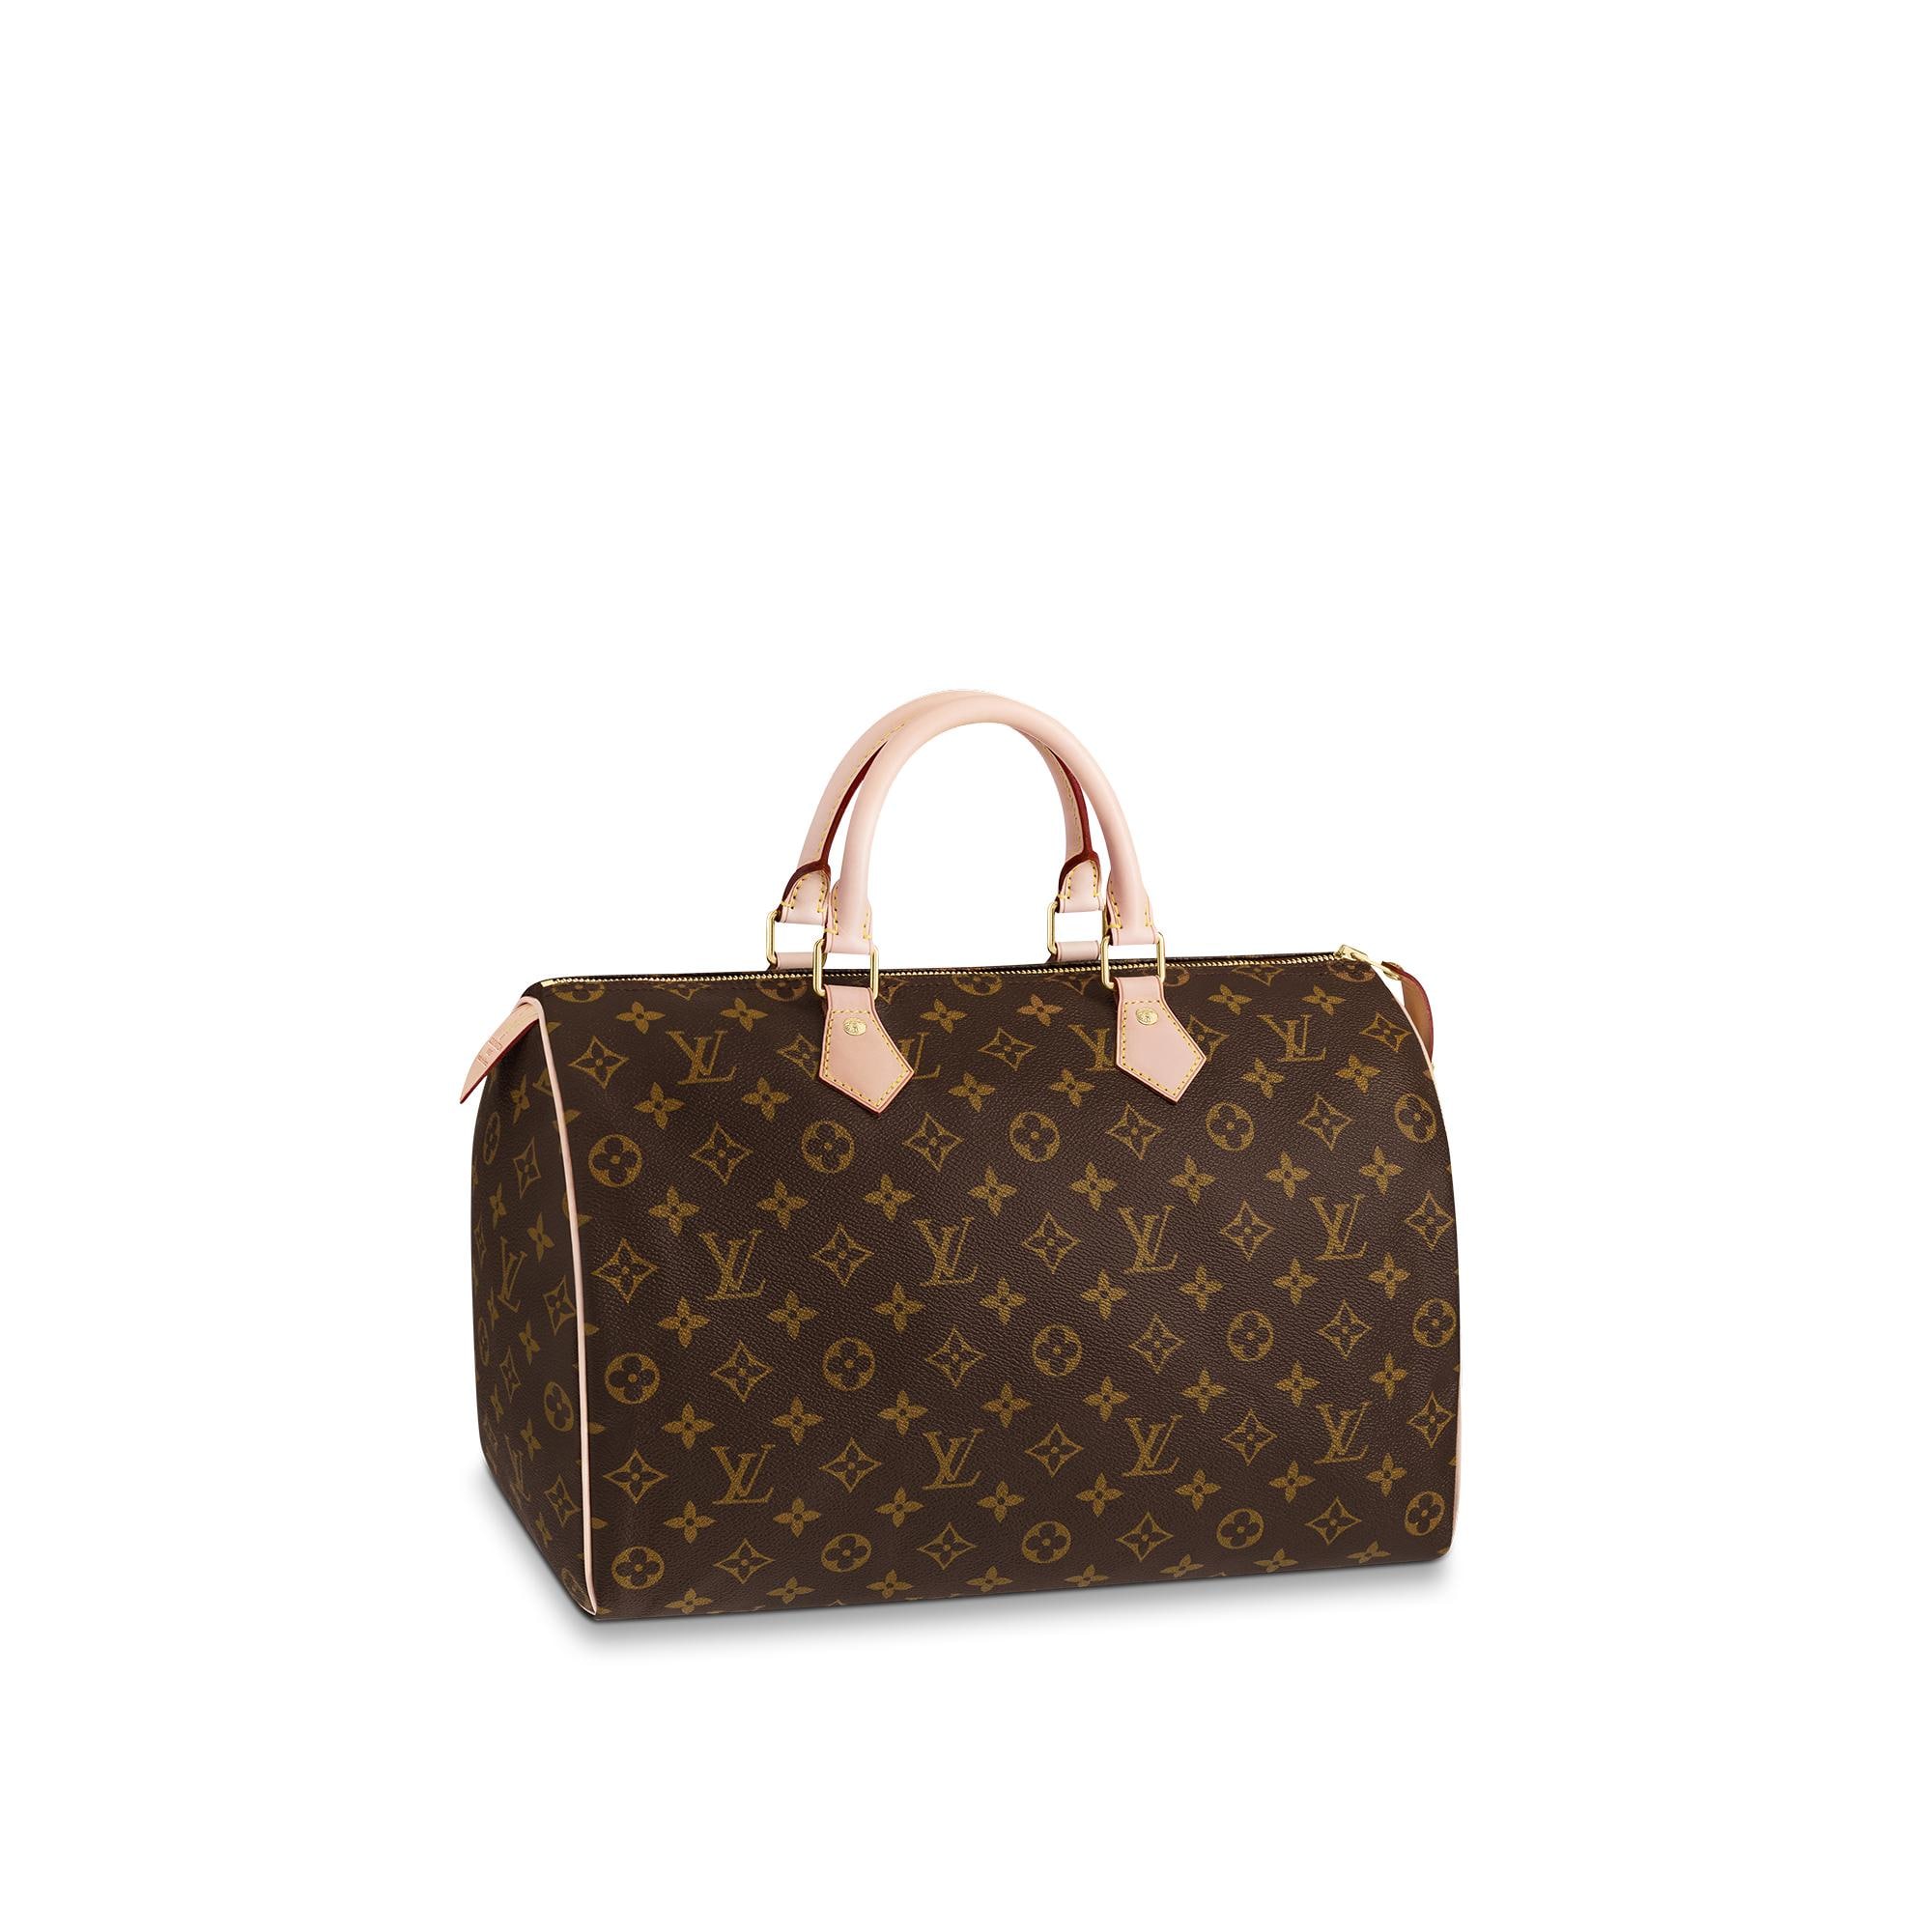 Louis Vuitton Speedy History: The Classic Bag Loved by Fashionistas